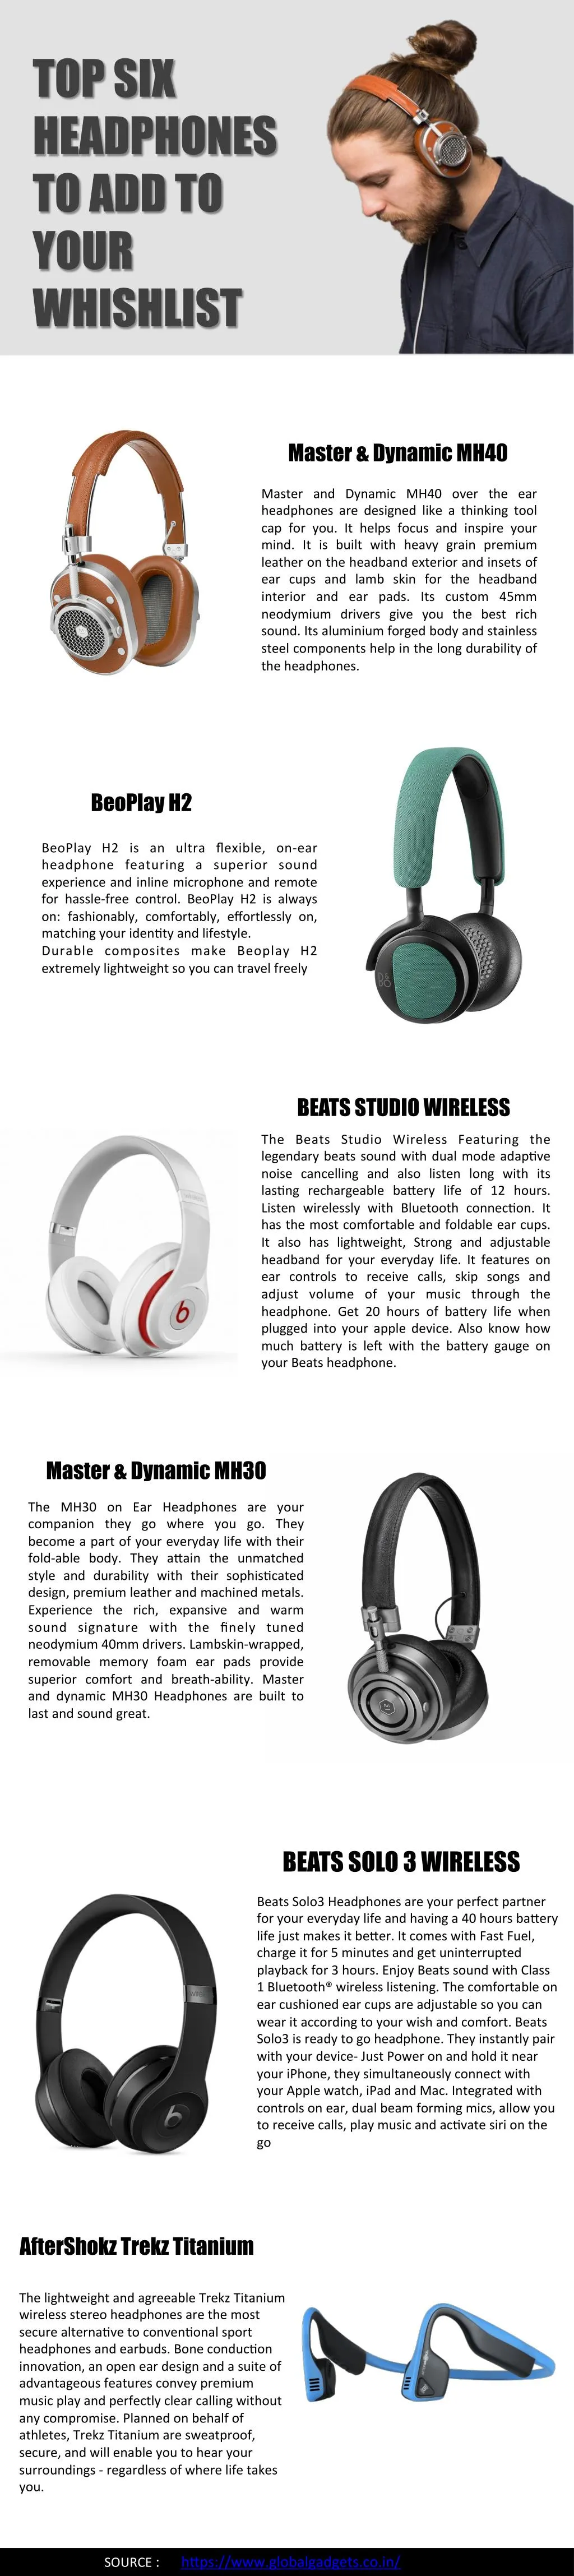 top six headphones to add to your whishlist